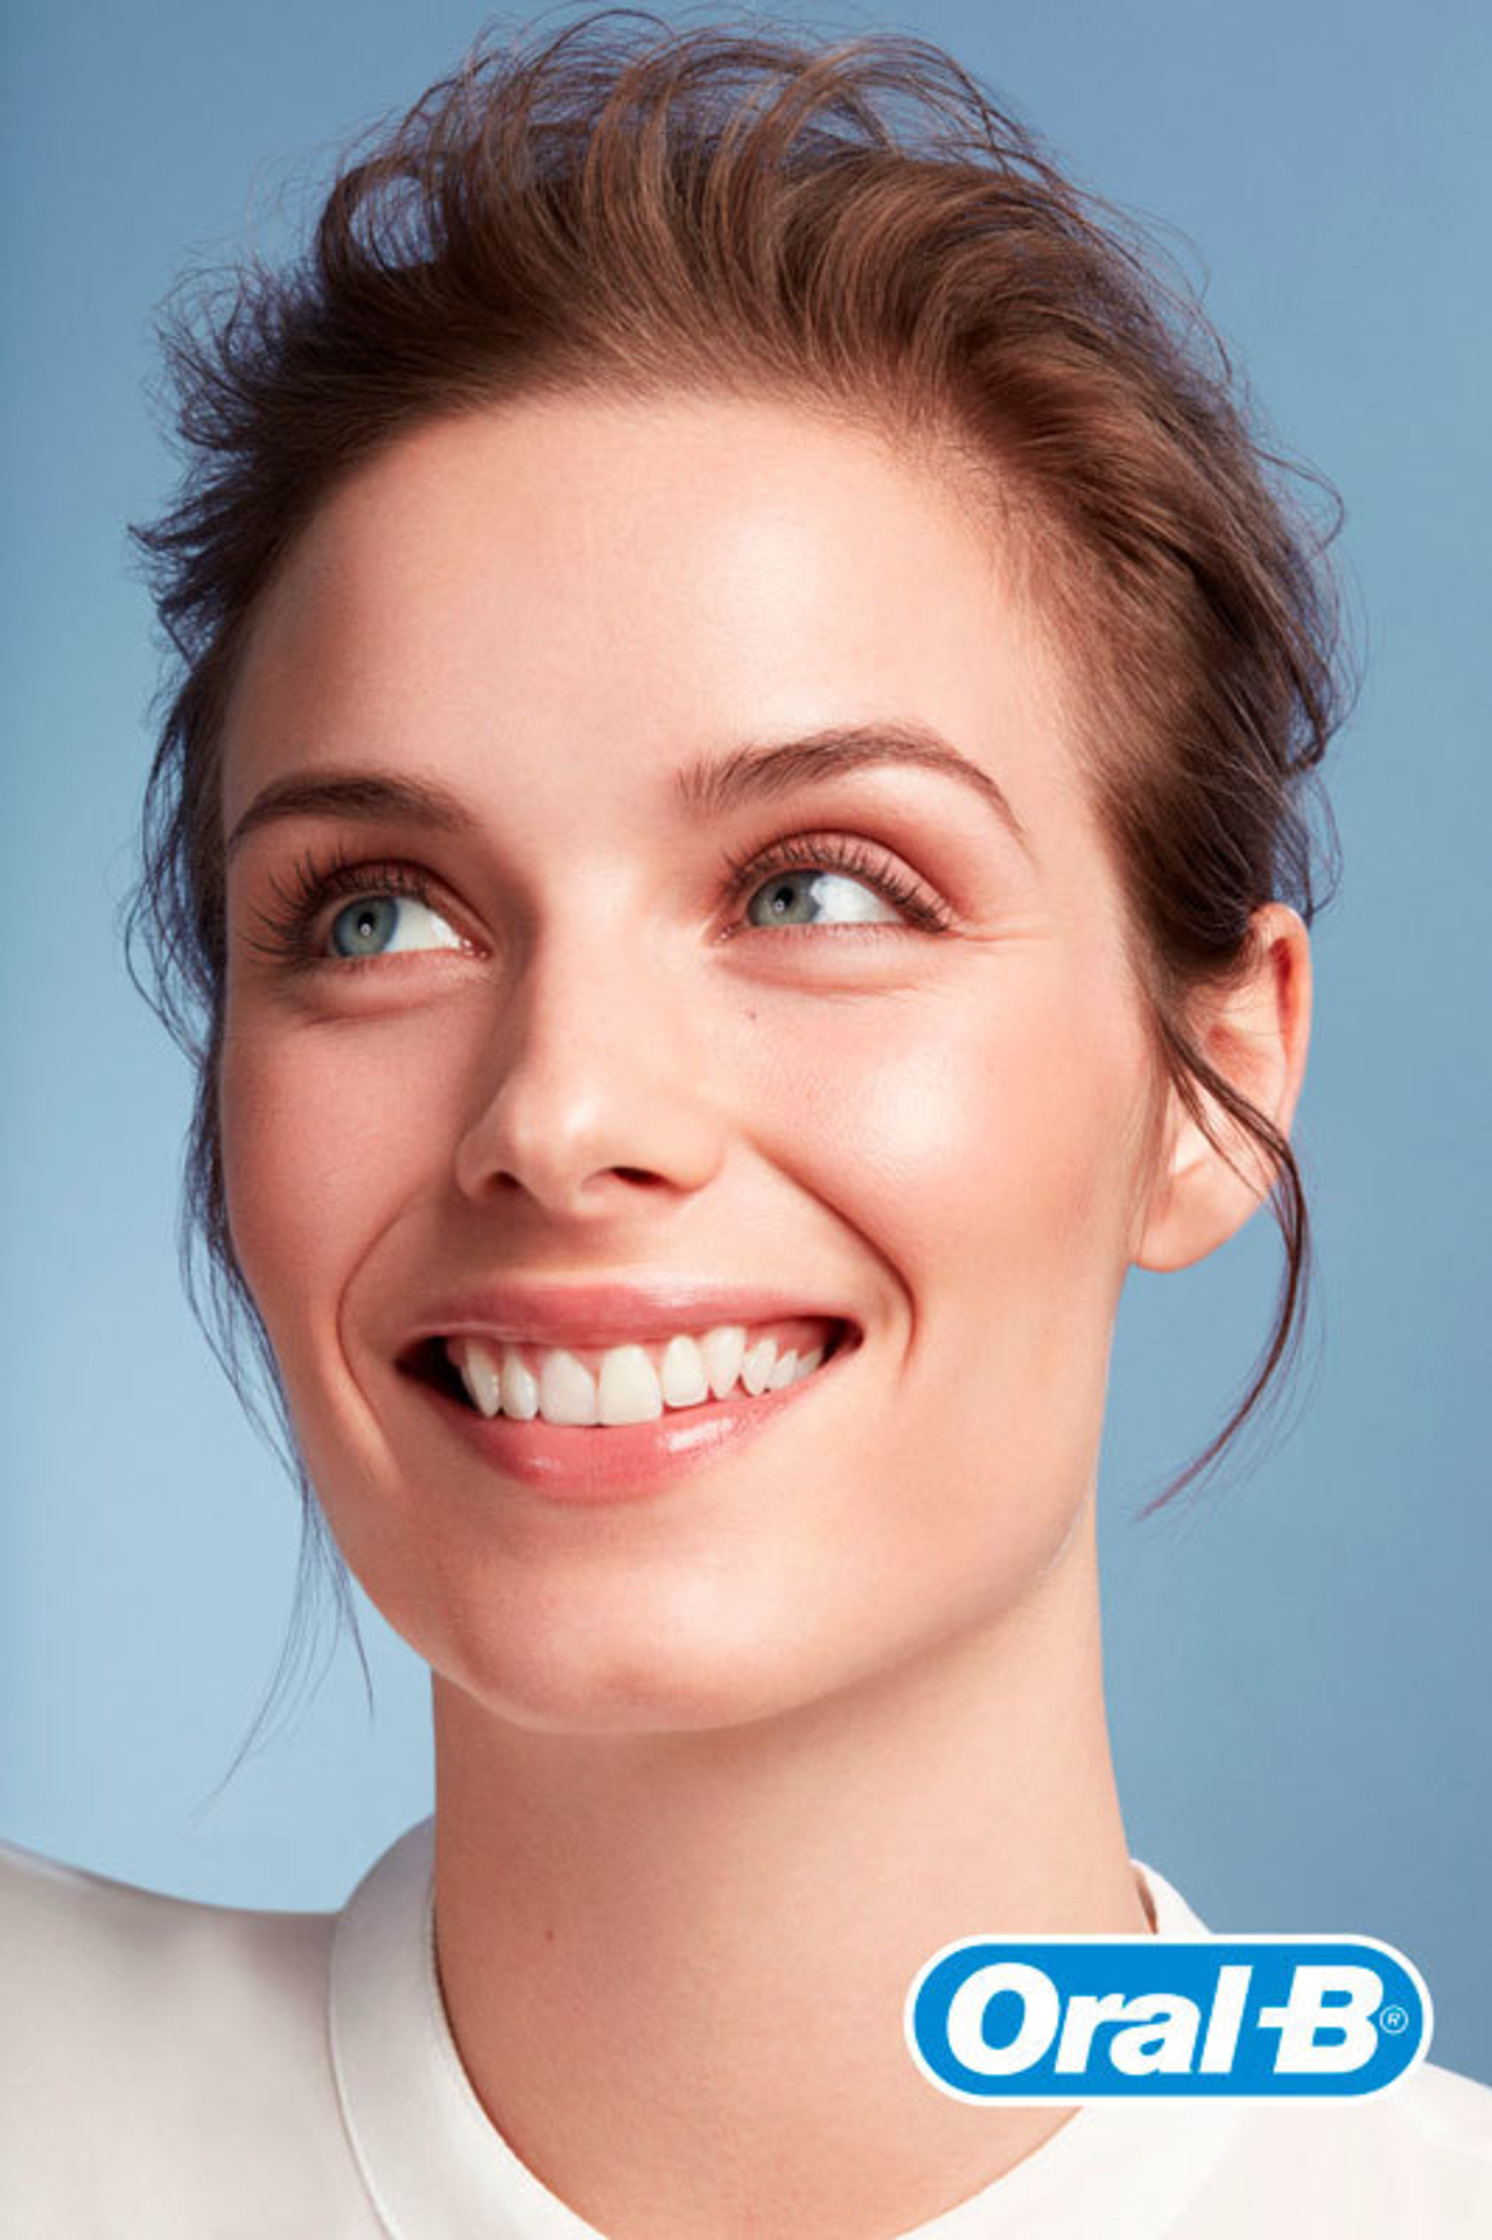 a woman smiles with an oral b product on her face for Oral B @fraukefischer